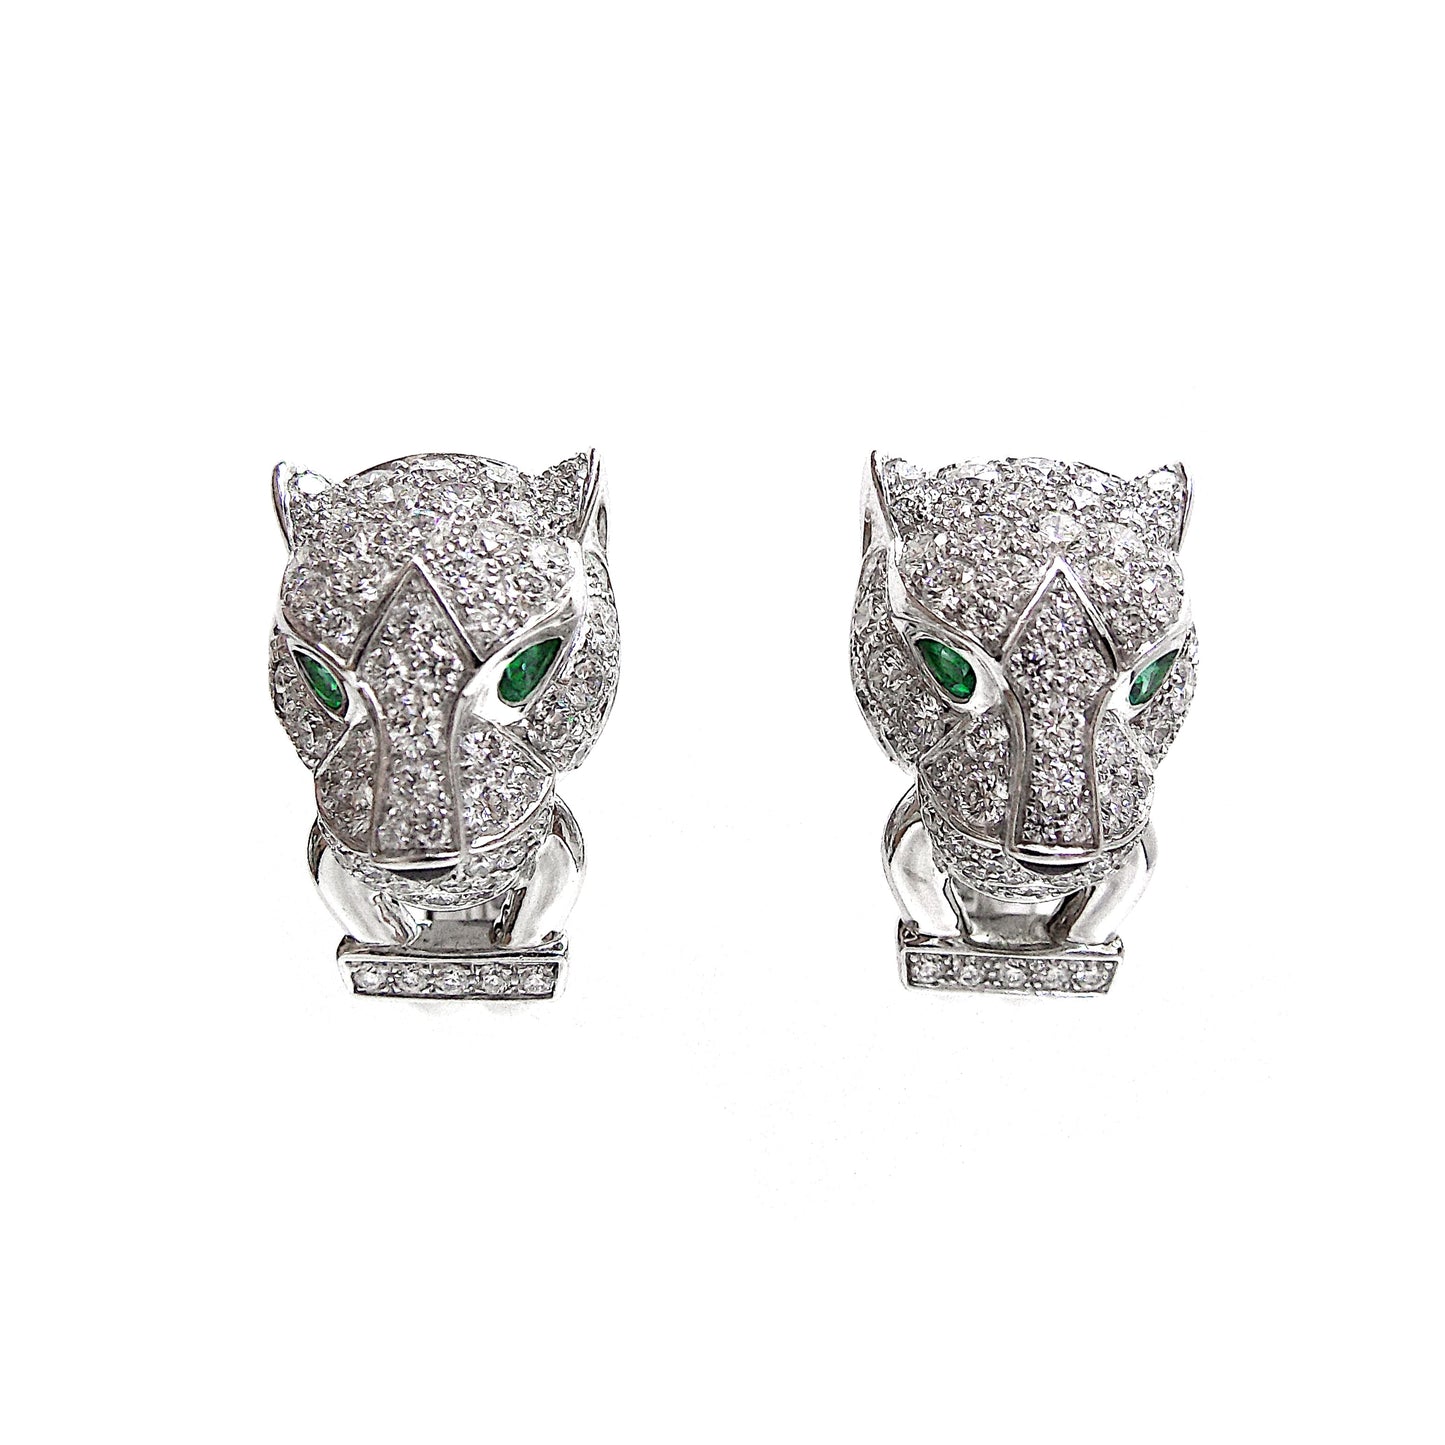 Cartier Pair of Diamond Emerald Onyx Earrings, 'Panthere'